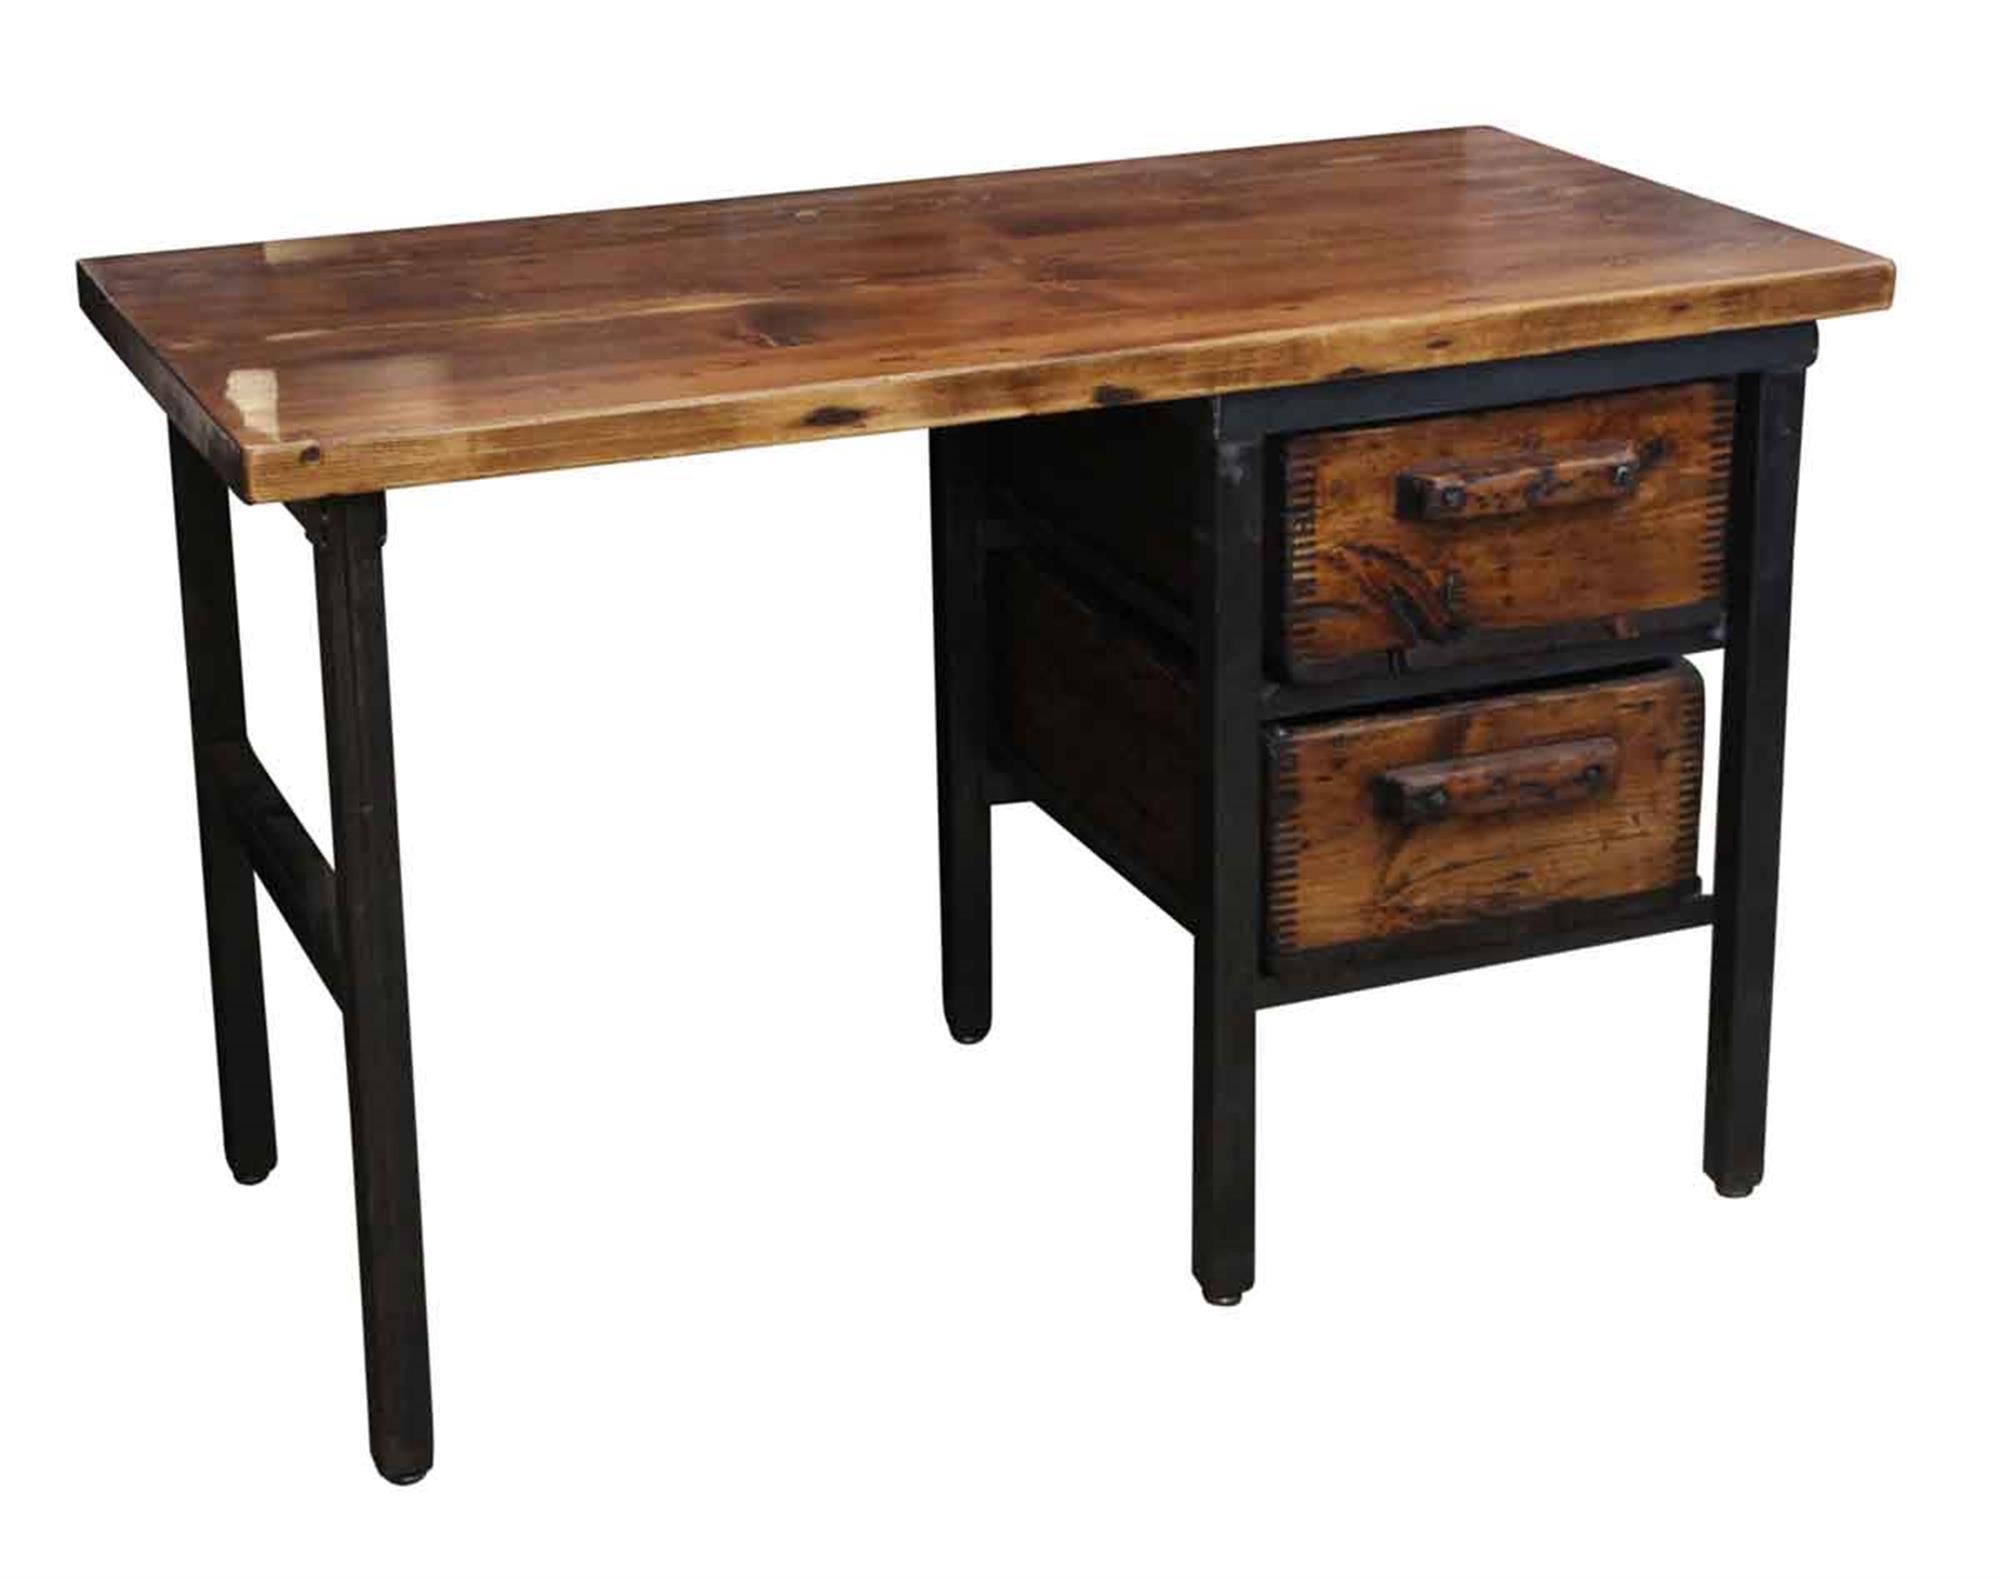 Manufactured by Olde good things, this desk is made using reclaimed old growth pine and salvaged wood bins from a New England tool company, all custom fit in a black steel frame. Please note since each desk is custom built, each desk varies slightly